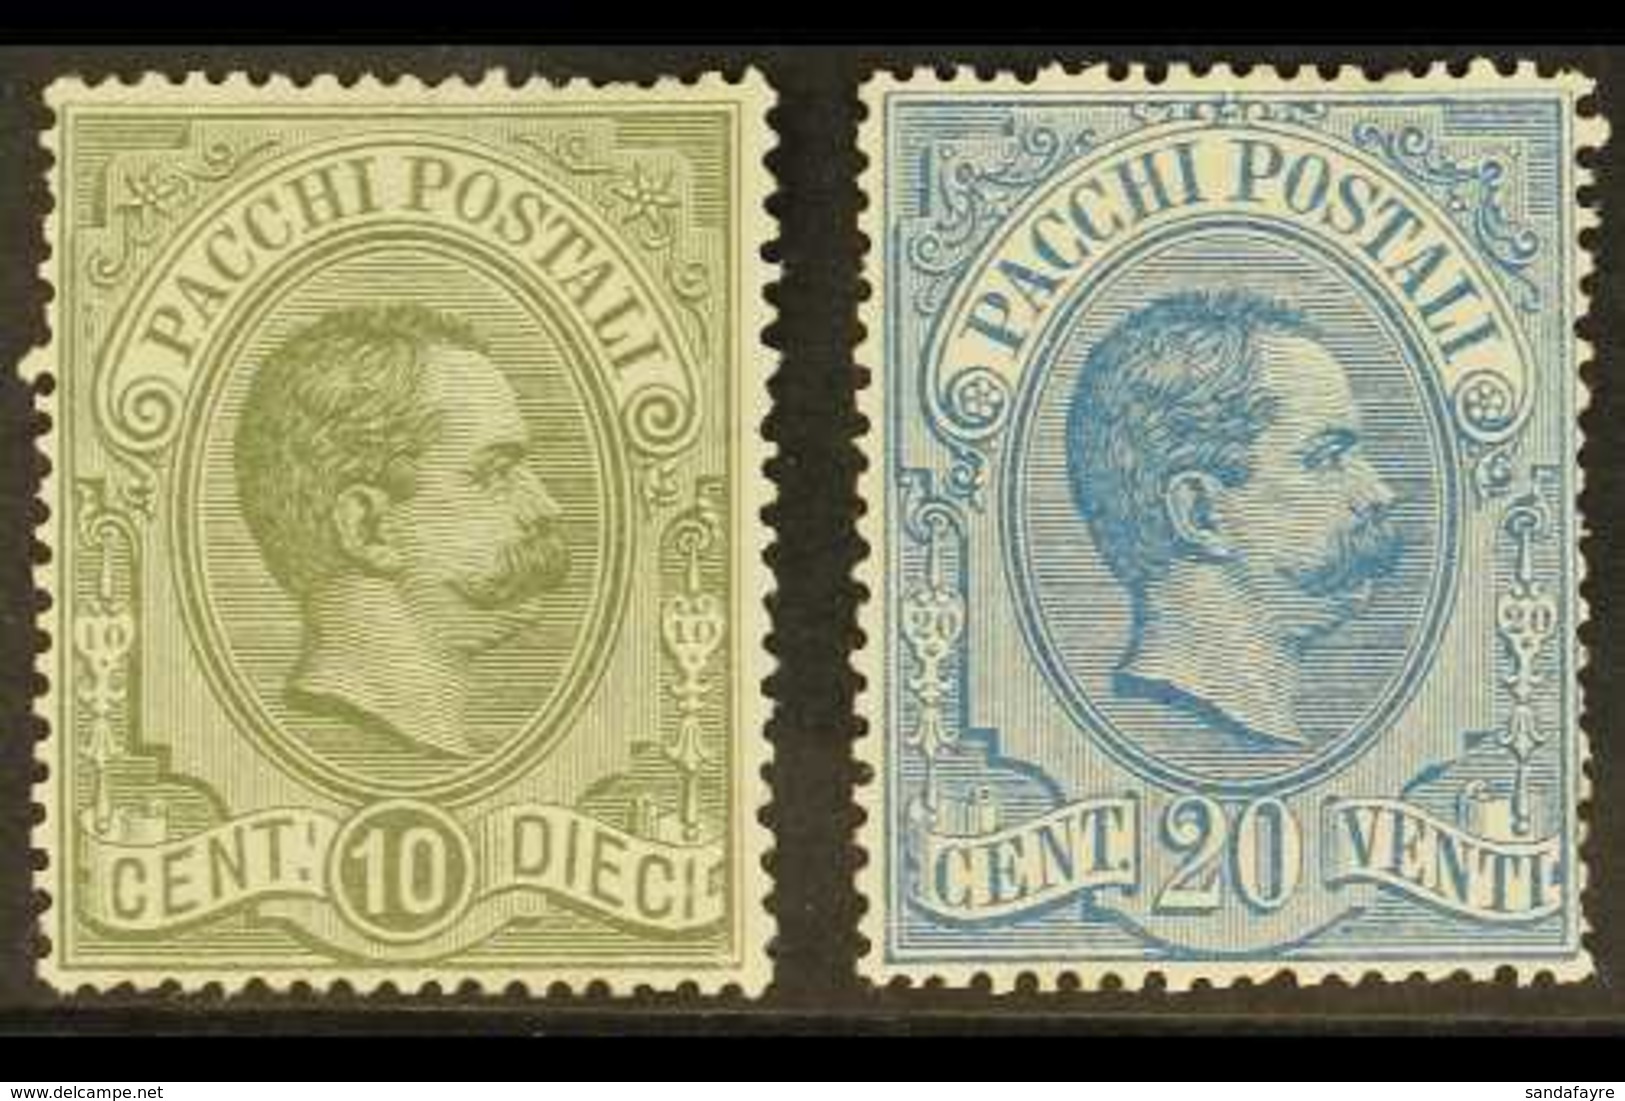 PARCEL POST 1884 10c Olive & 20c Blue, Sassone 1/2, Mi 1/2, 20c Blunt Perfs At Right, Otherwise Never Hinged Mint (2 Sta - Zonder Classificatie